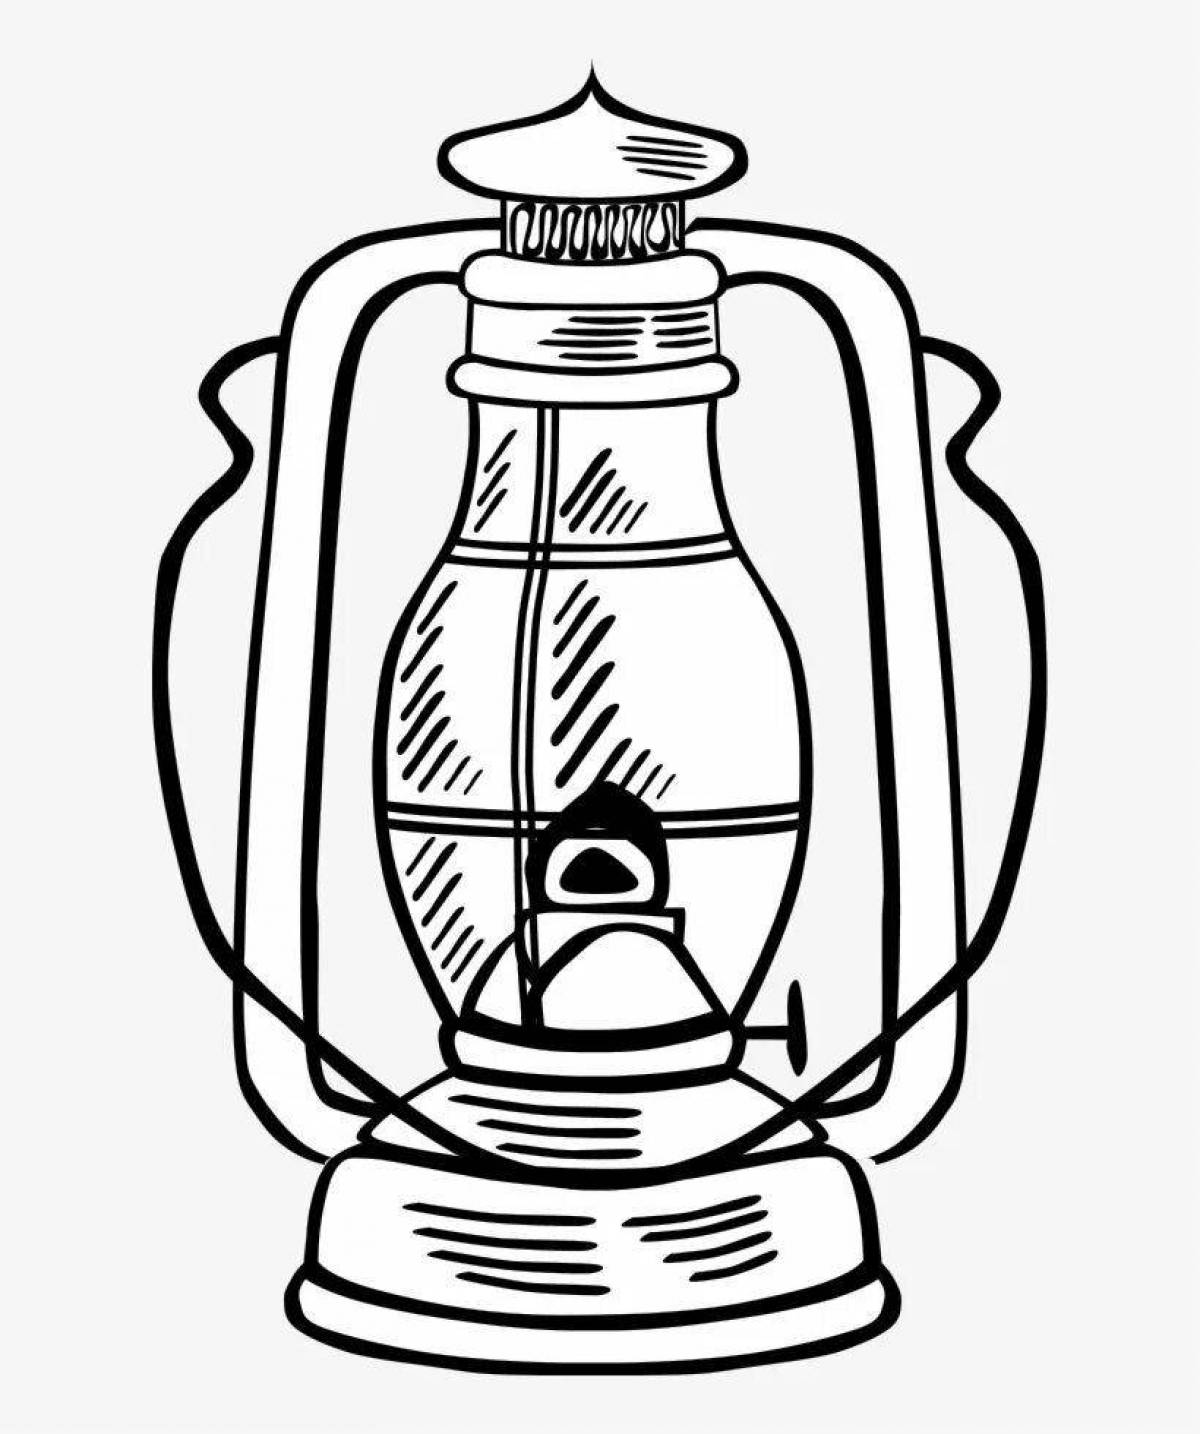 Playful lamp coloring page for kids